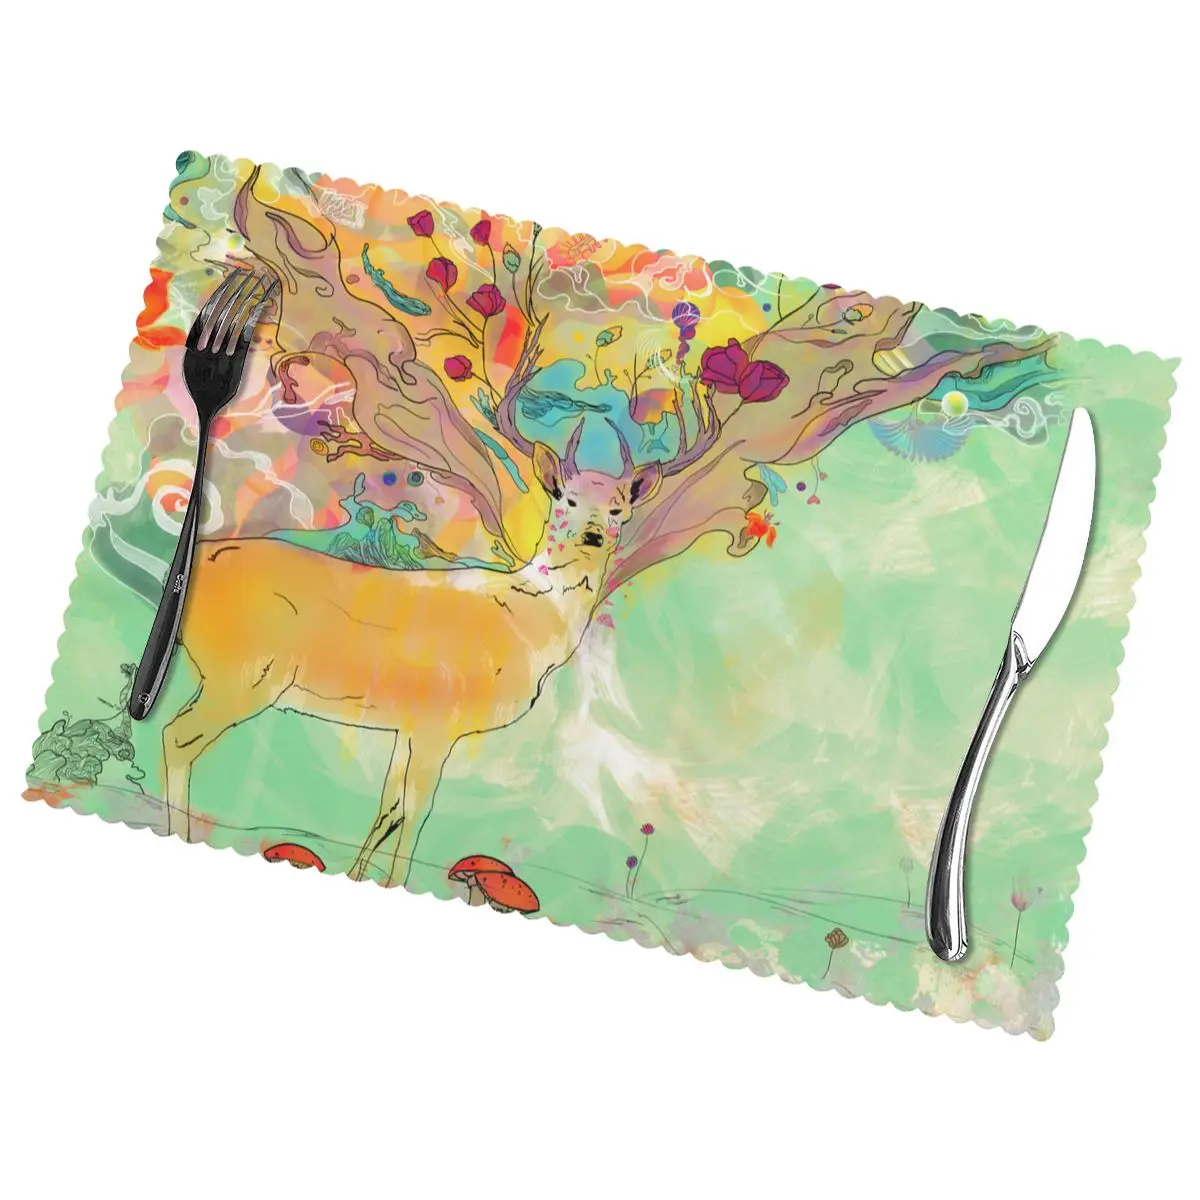 

Watercolor Art Deer Non-Slip Insulation Place Mats for Kitchen Dining Table Washable Placemats Bowl Coaster Cup Mat Set of 6